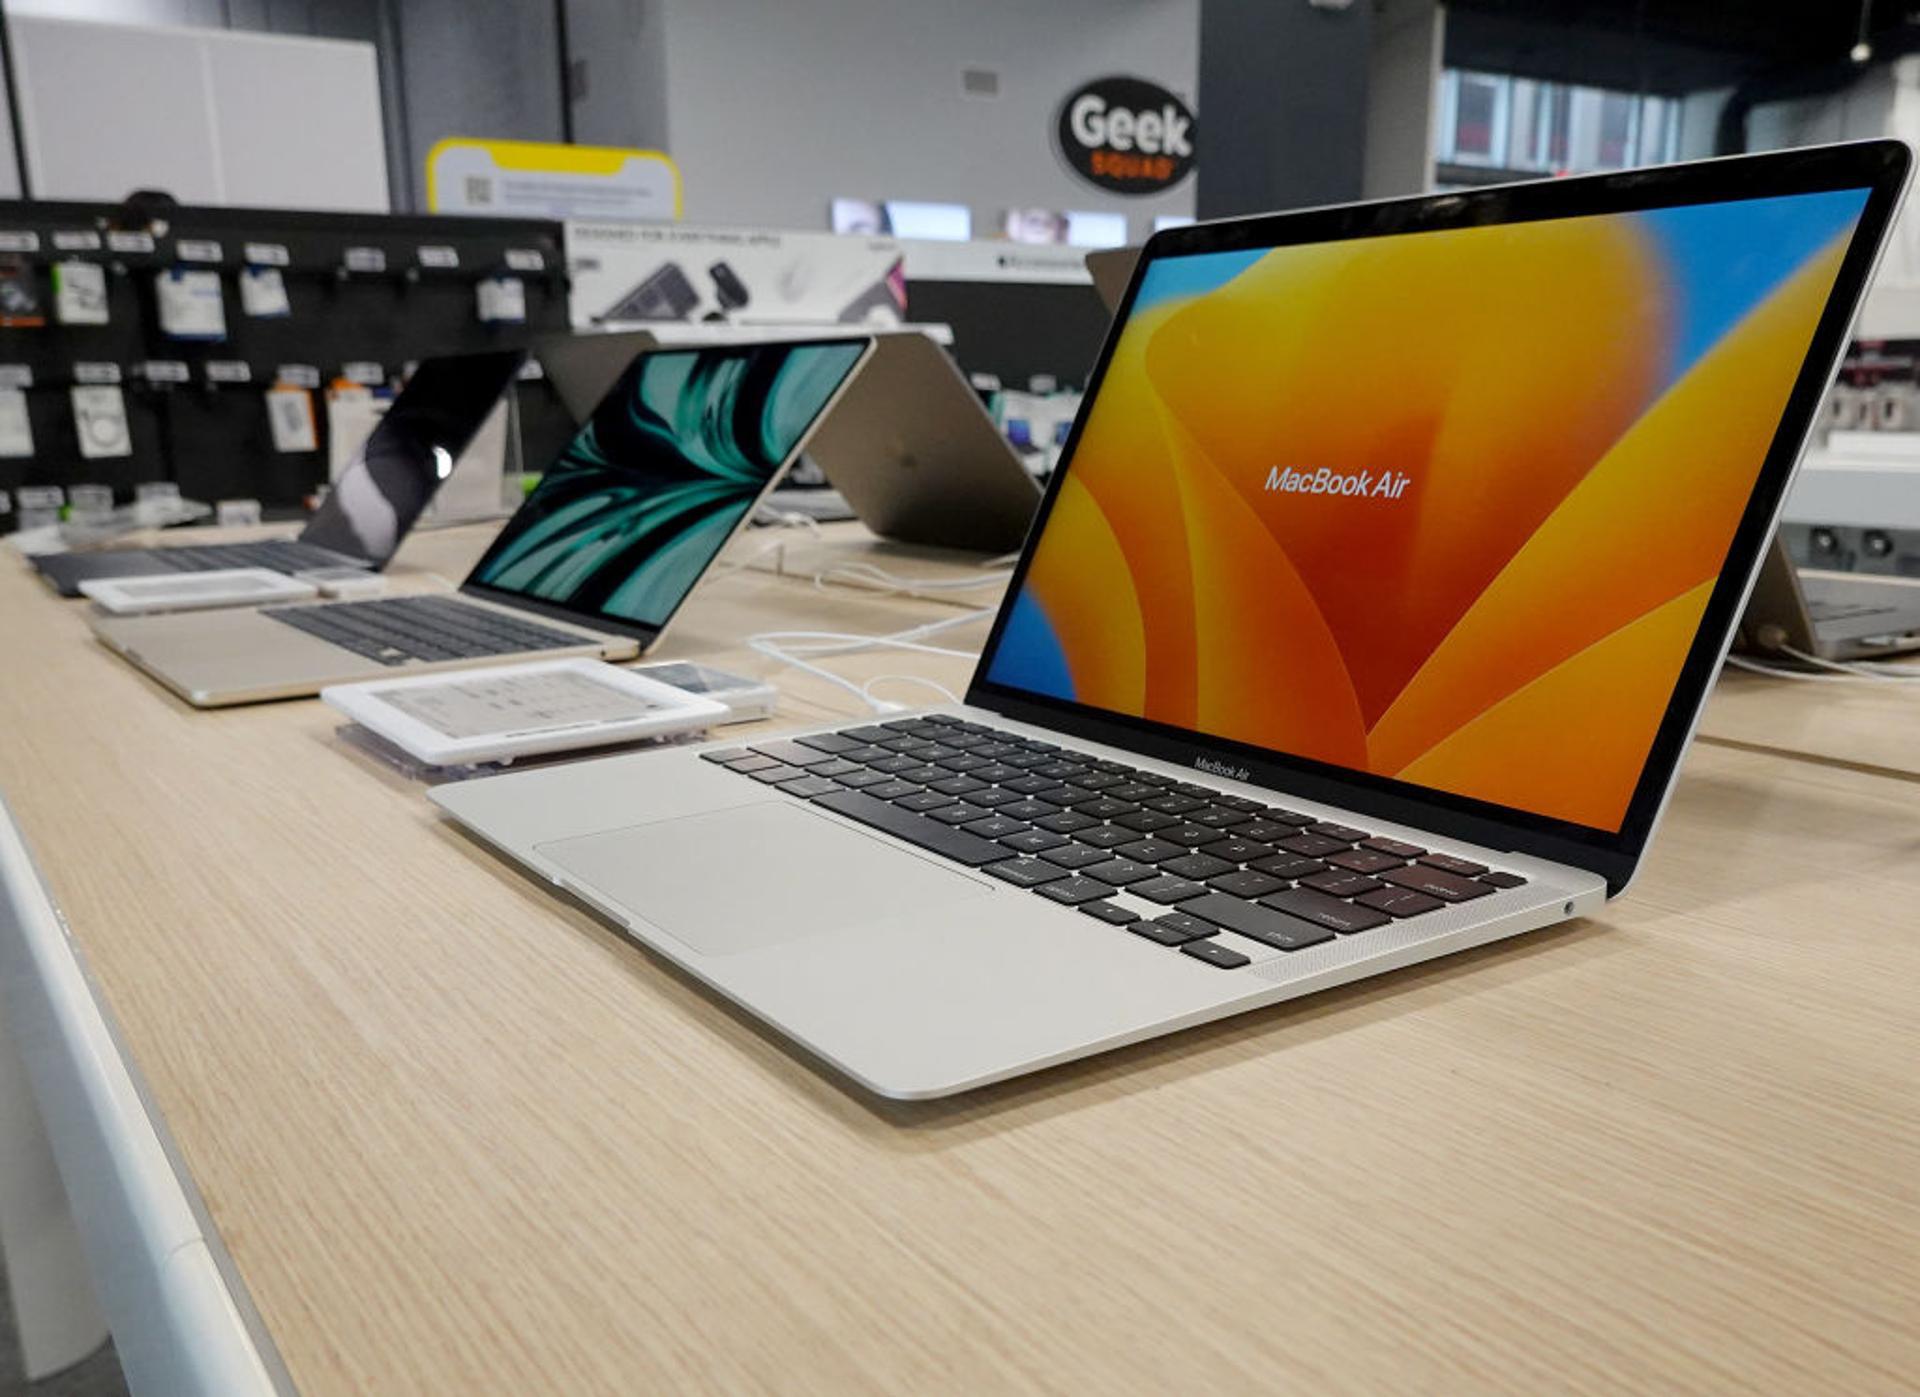 Apple computers sit on display in an electronics store on April 11, 2023, in Miami, Florida